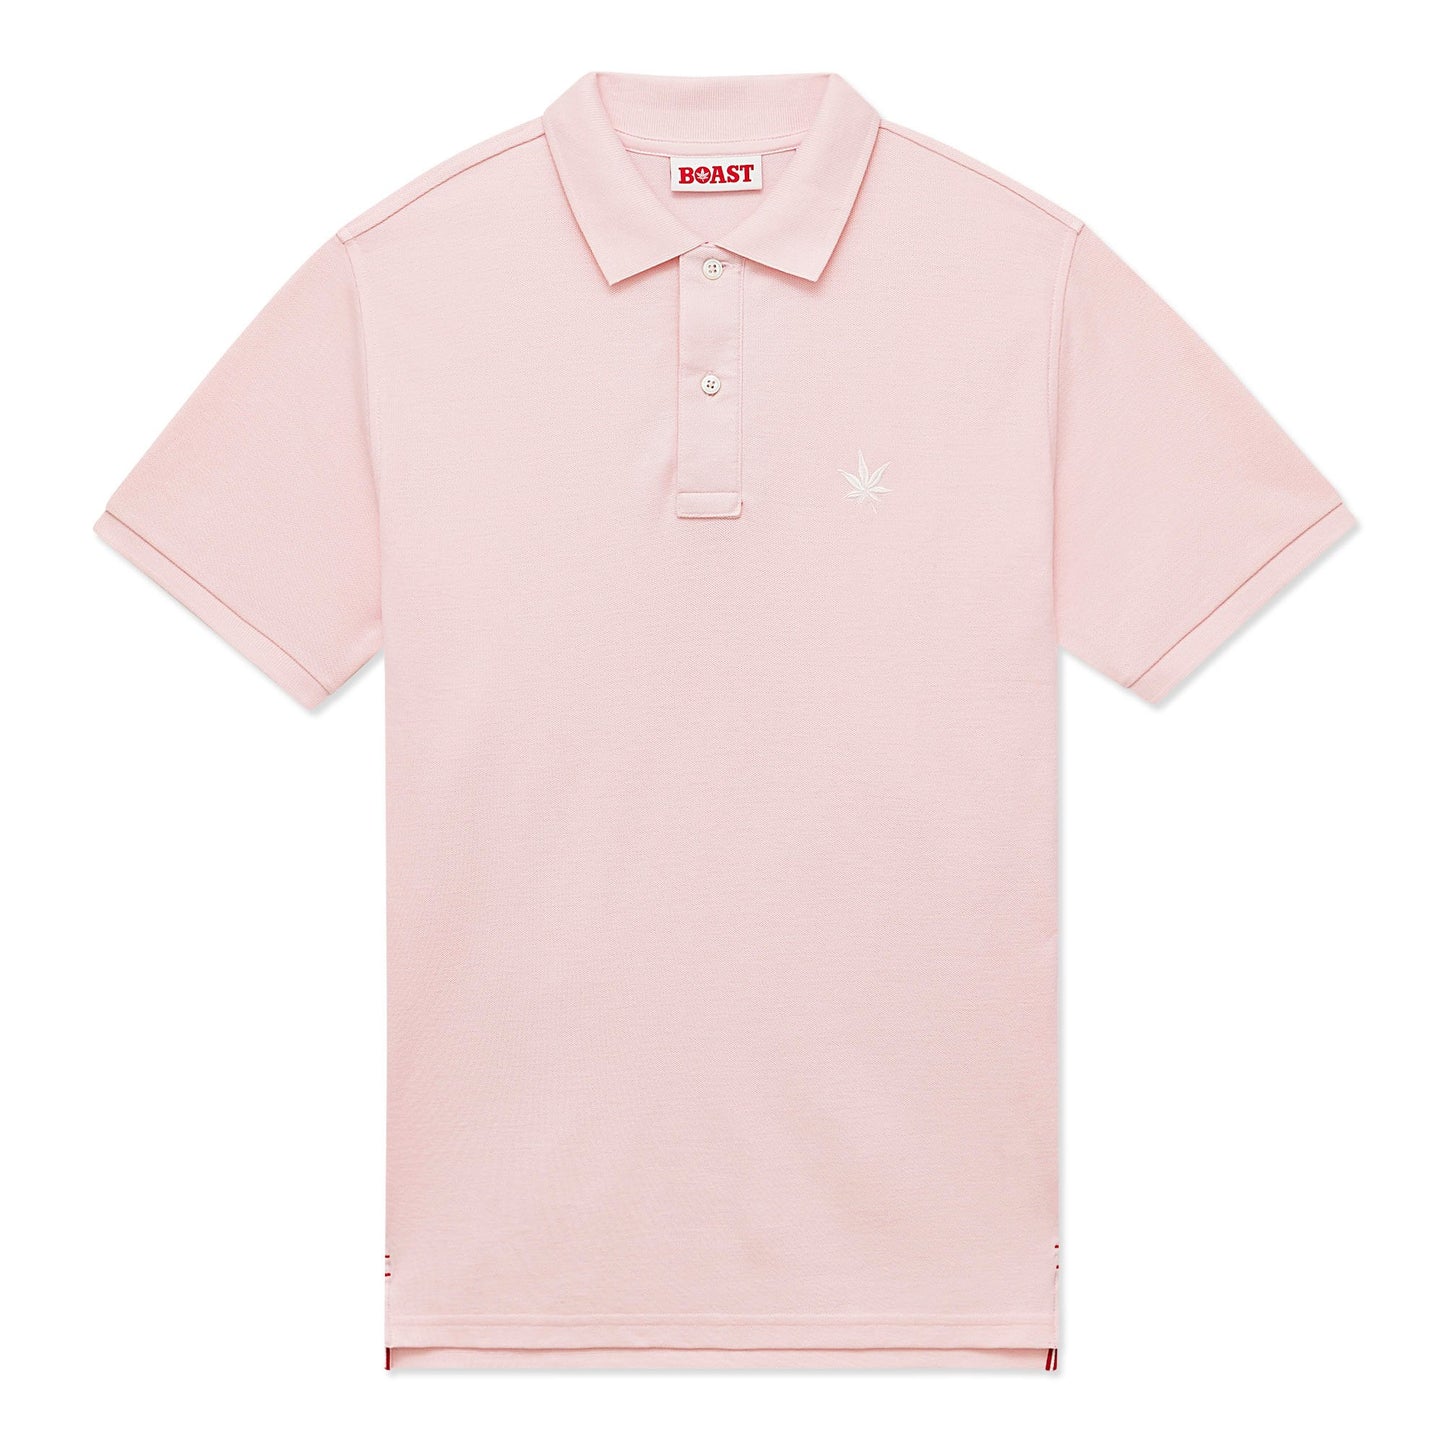 Pink polo with white embroidered leaf on the left chest.